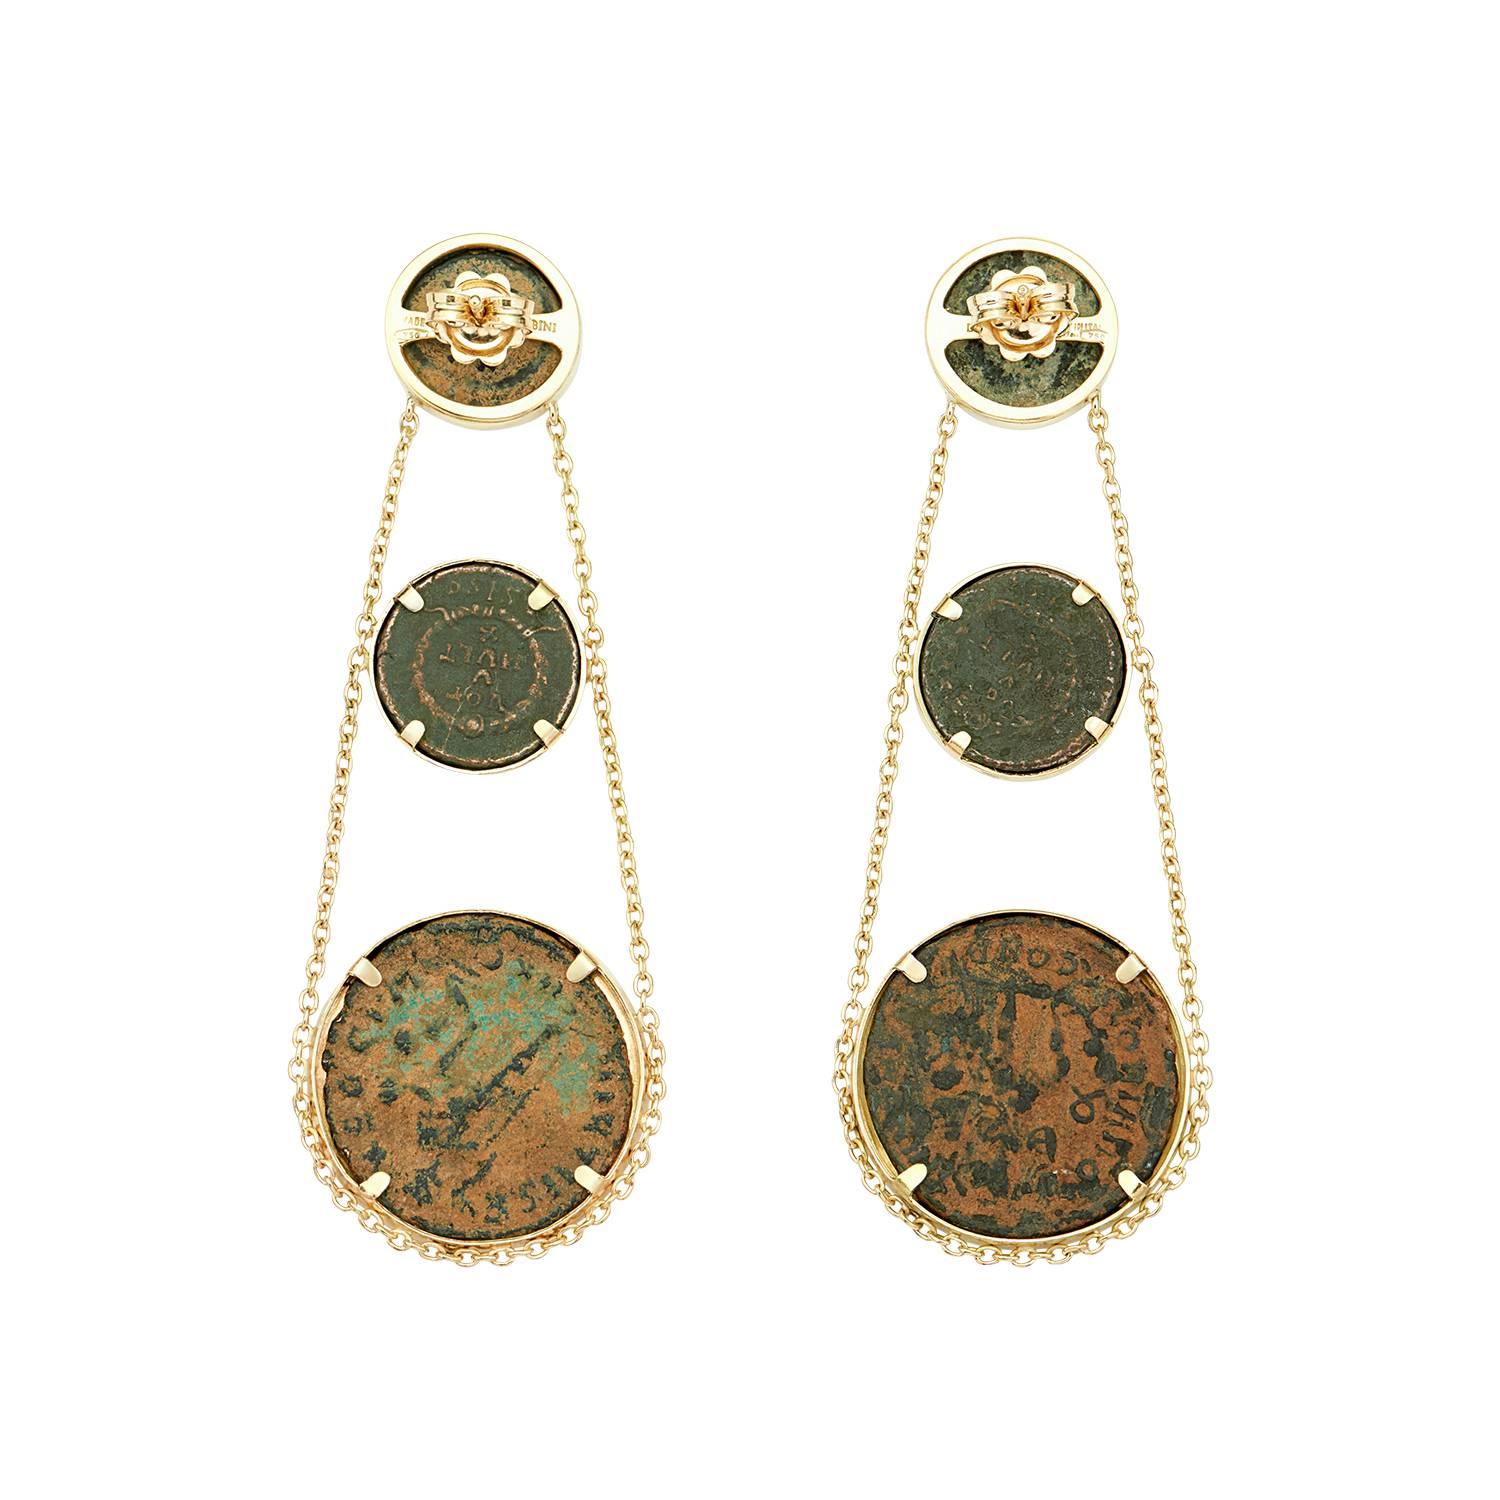 These Dubini coin earrings from the 'Empires' collection feature authentic Roman Imperial bronze coins set in 18K yellow gold.

Please note that we offer a bespoke service. Should you wish to customise your piece by selecting from our range of